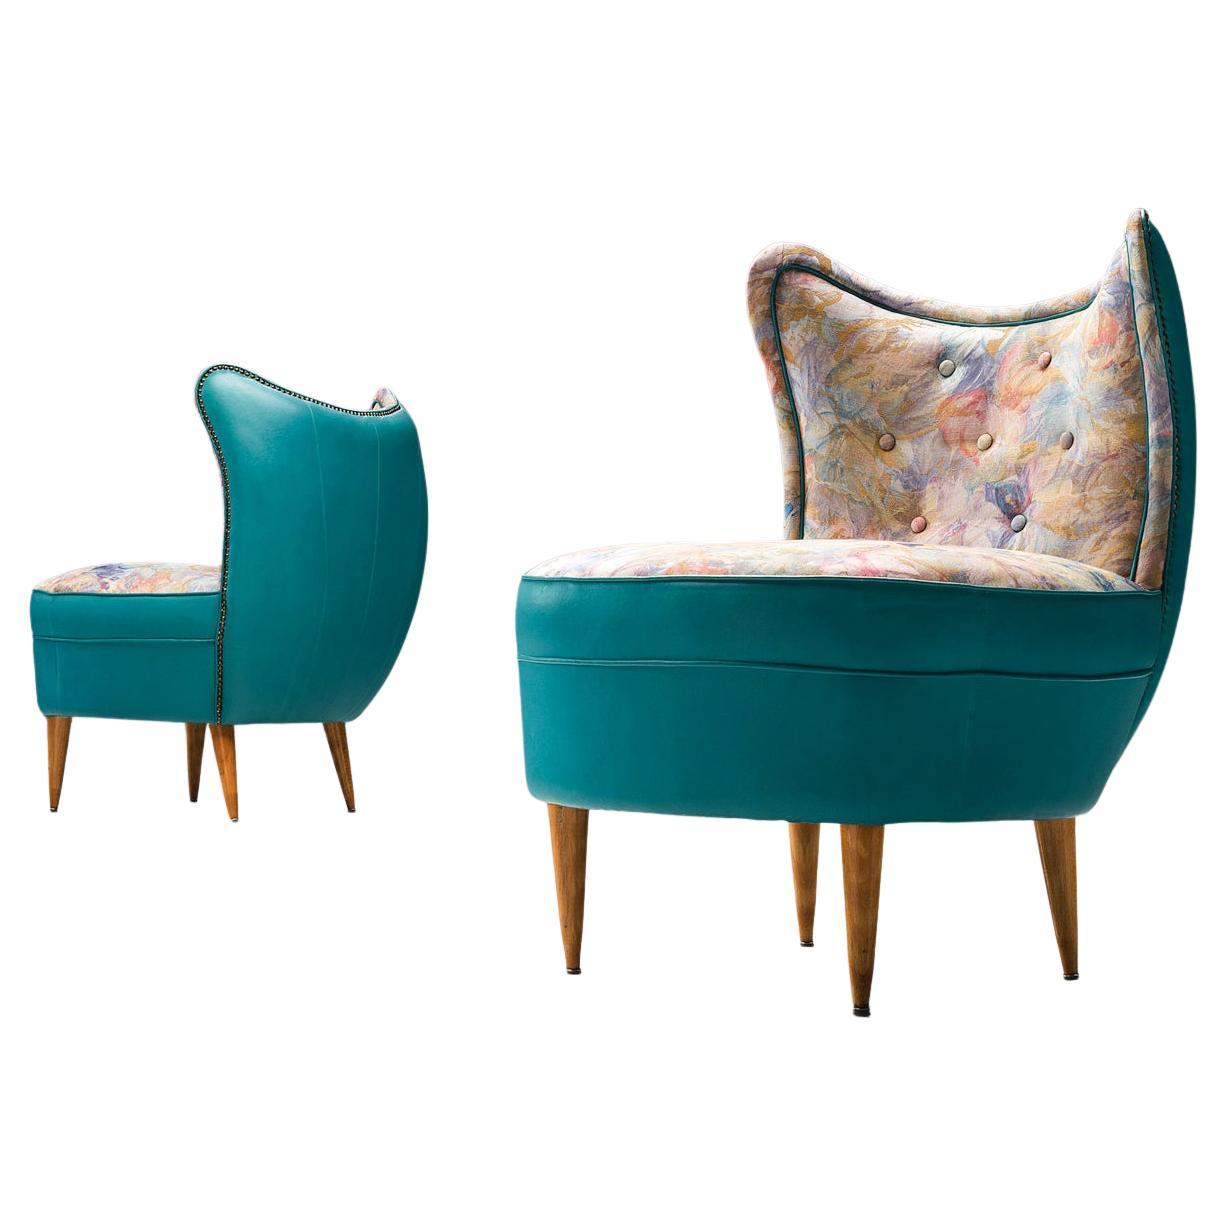 Classic Italian Pair of Lounge Chairs in Turquoise Leatherette For Sale